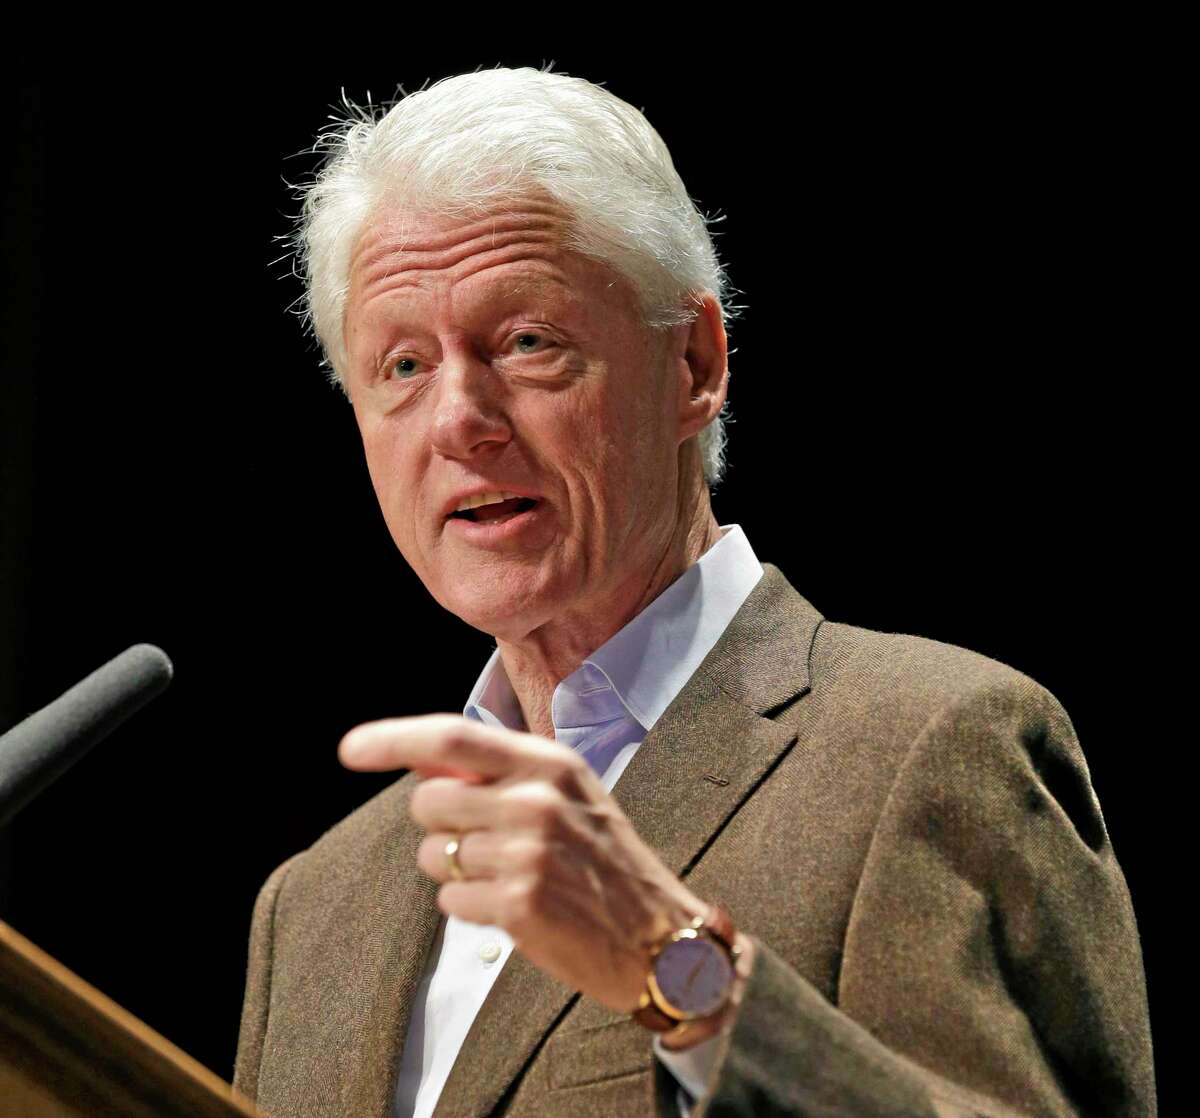 FILE - President Bill Clinton has brought pressure on Obama to fix the administration’s problem-plagued health care program, particularly to find a way to let people keep their health coverage, even if it means changing the law. Clinton says Obama should “honor the commitment that the federal government made to those people and let them keep what they got.” (AP Photo/Steve Helber, File)